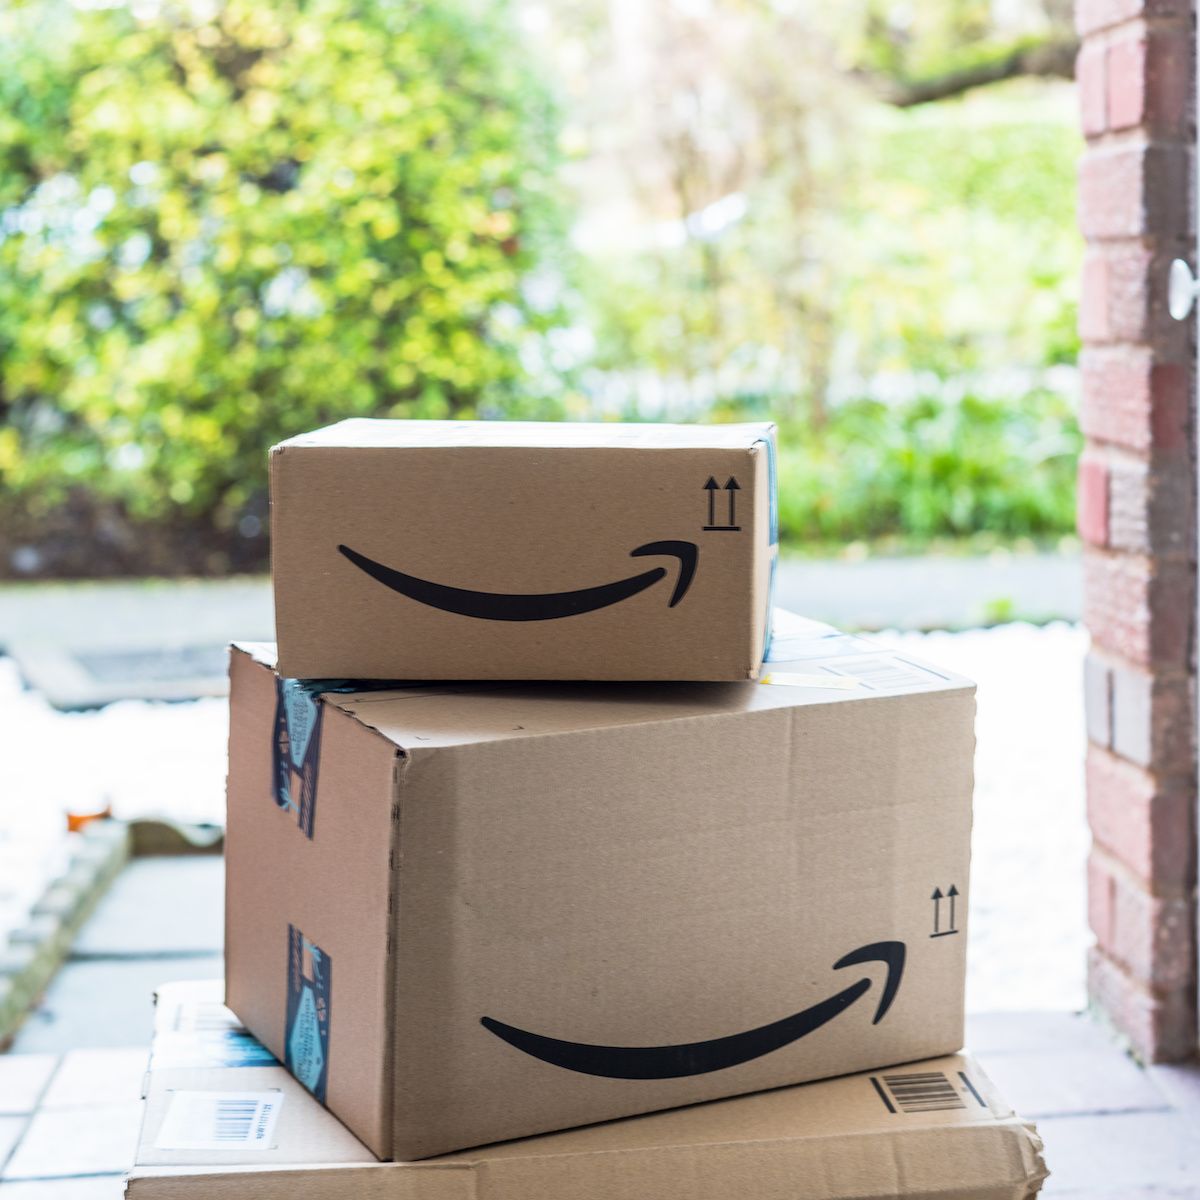 Two brown Amazon boxes with the smile logo sit on a front porch. Amazon brushing scams happen when retailers send you unordered packages in hopes to use your info to boost their sales.